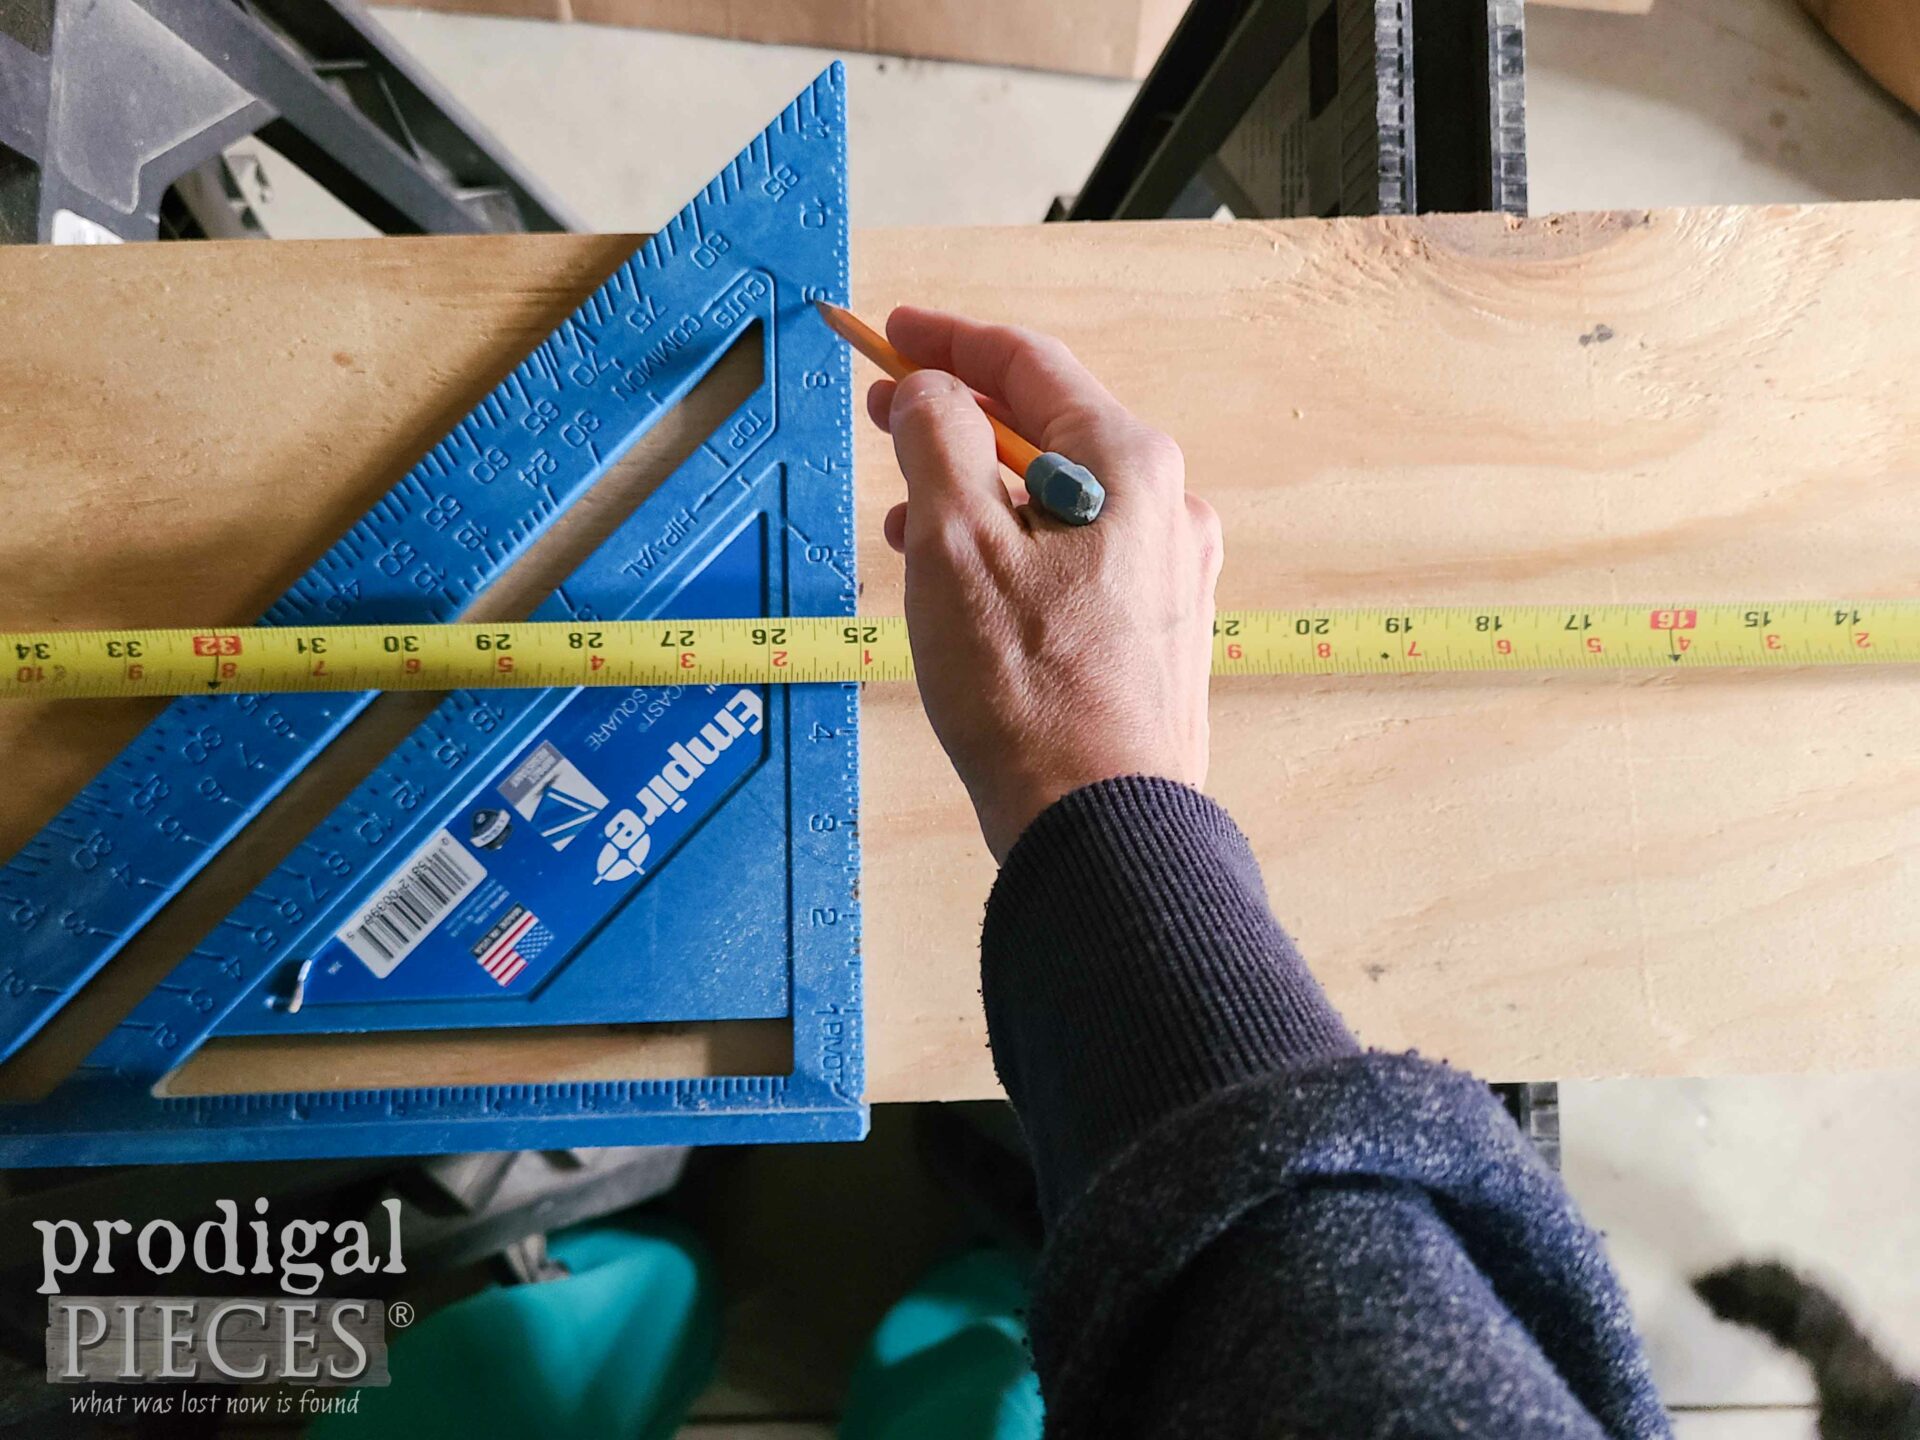 Cutting DIY Awning from Scrap Ply Wood | prodigalpieces.com #prodigalpieces